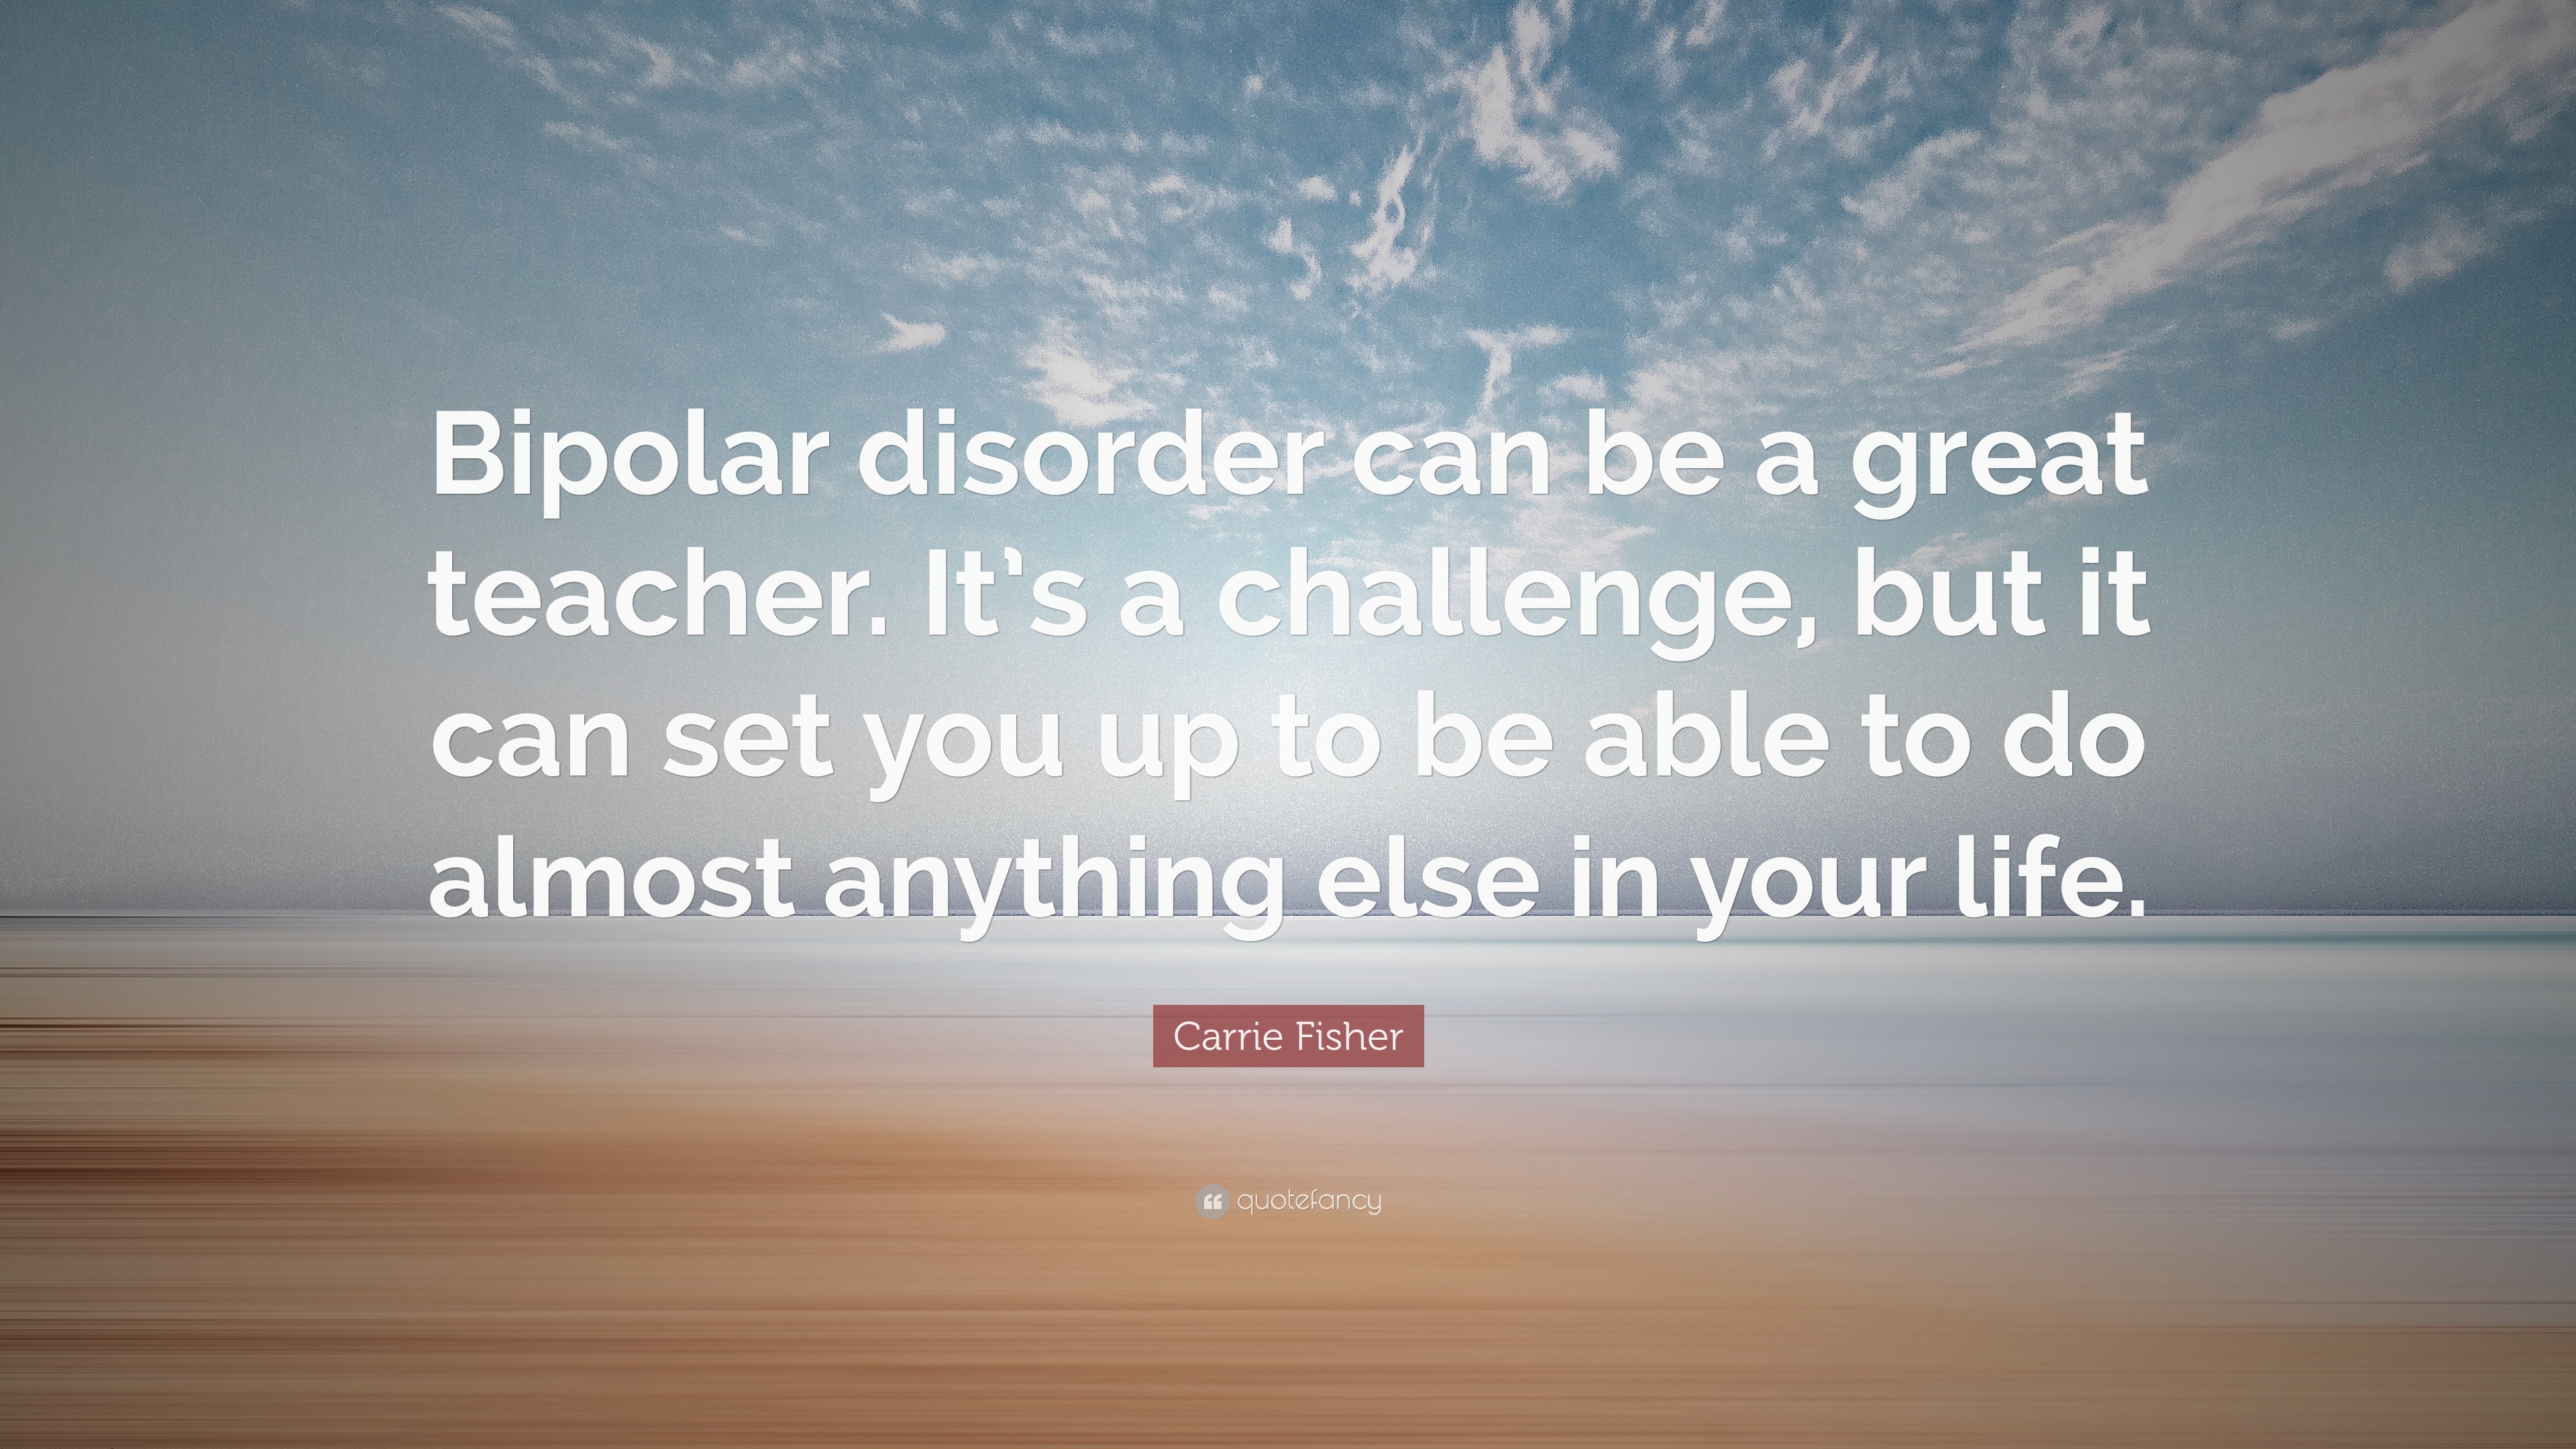 bipolar disorder encouraging quotes - Satisfyingly Blogging Image Library